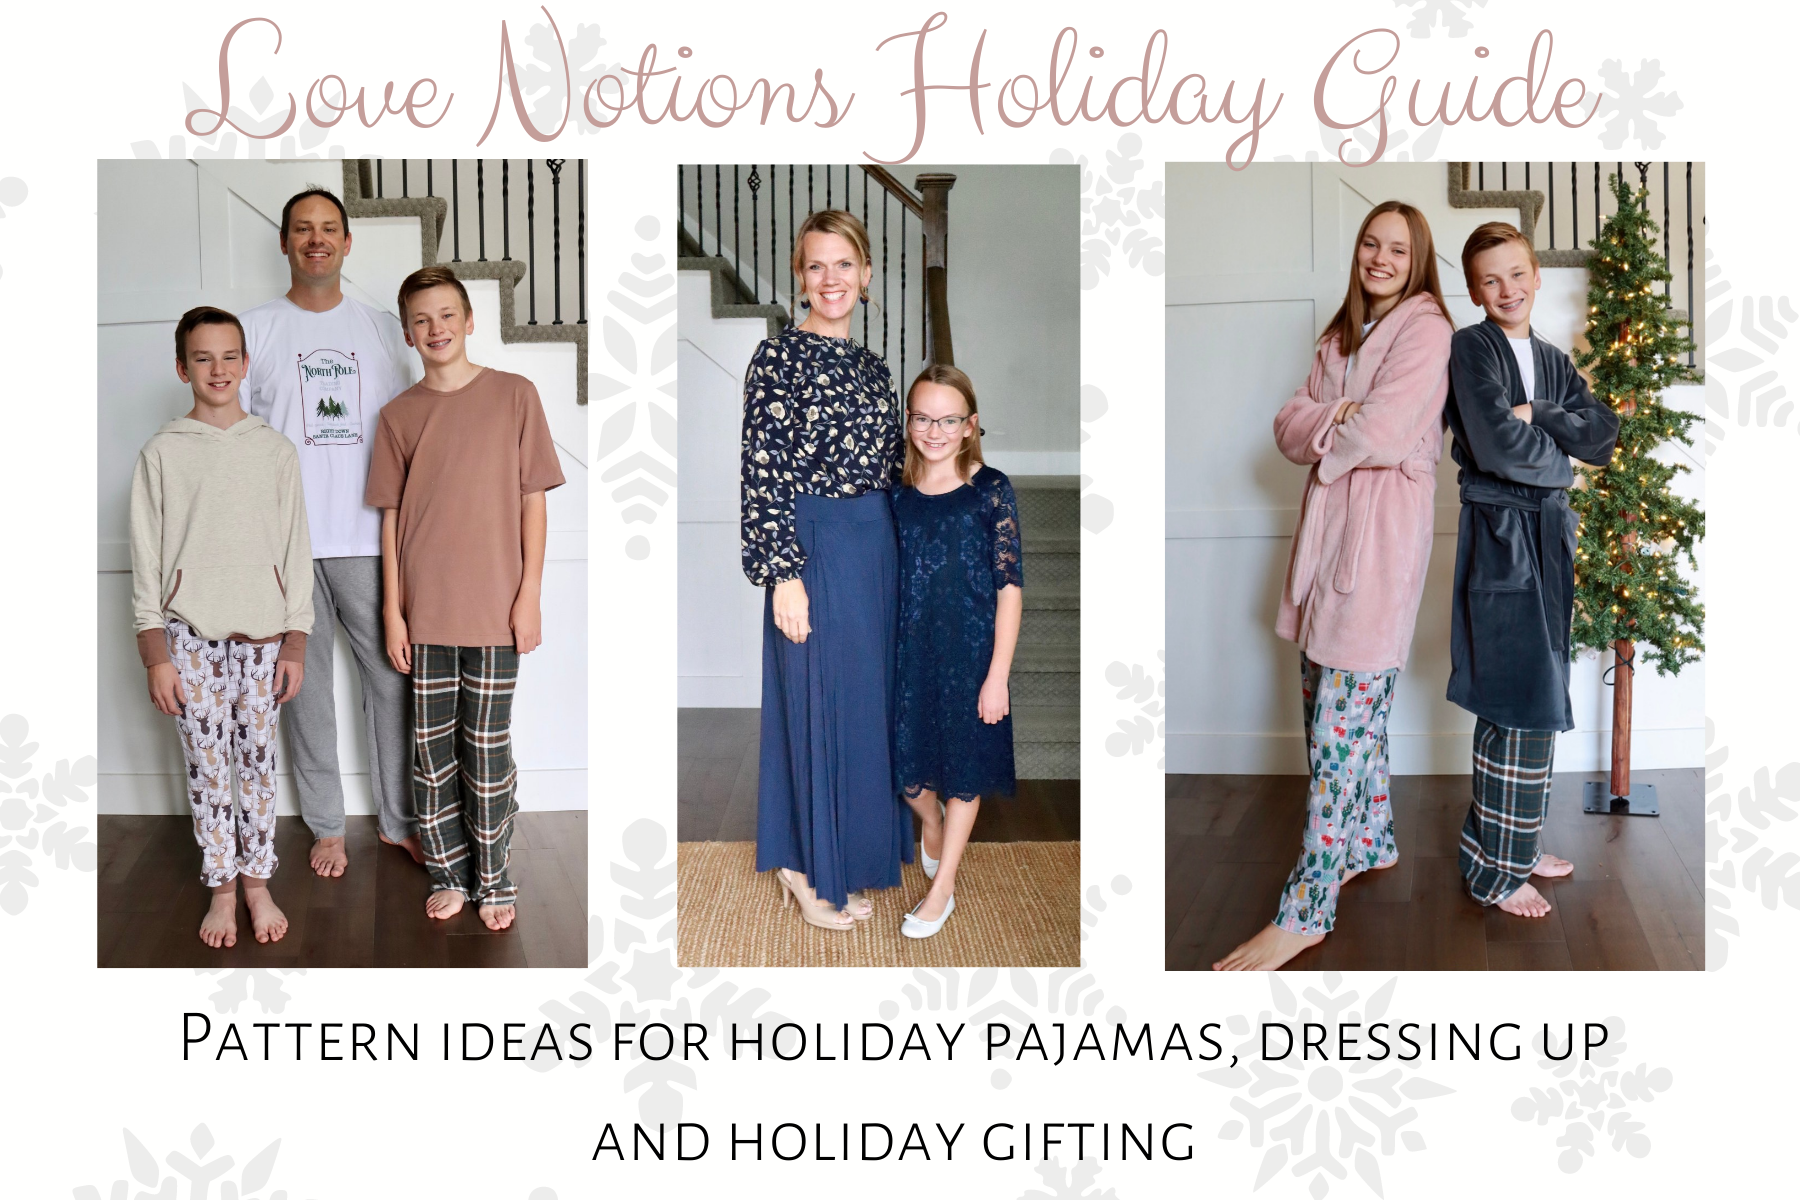 Love Notions Patterns for Holiday Pajamas, Dress Up, and Gifting